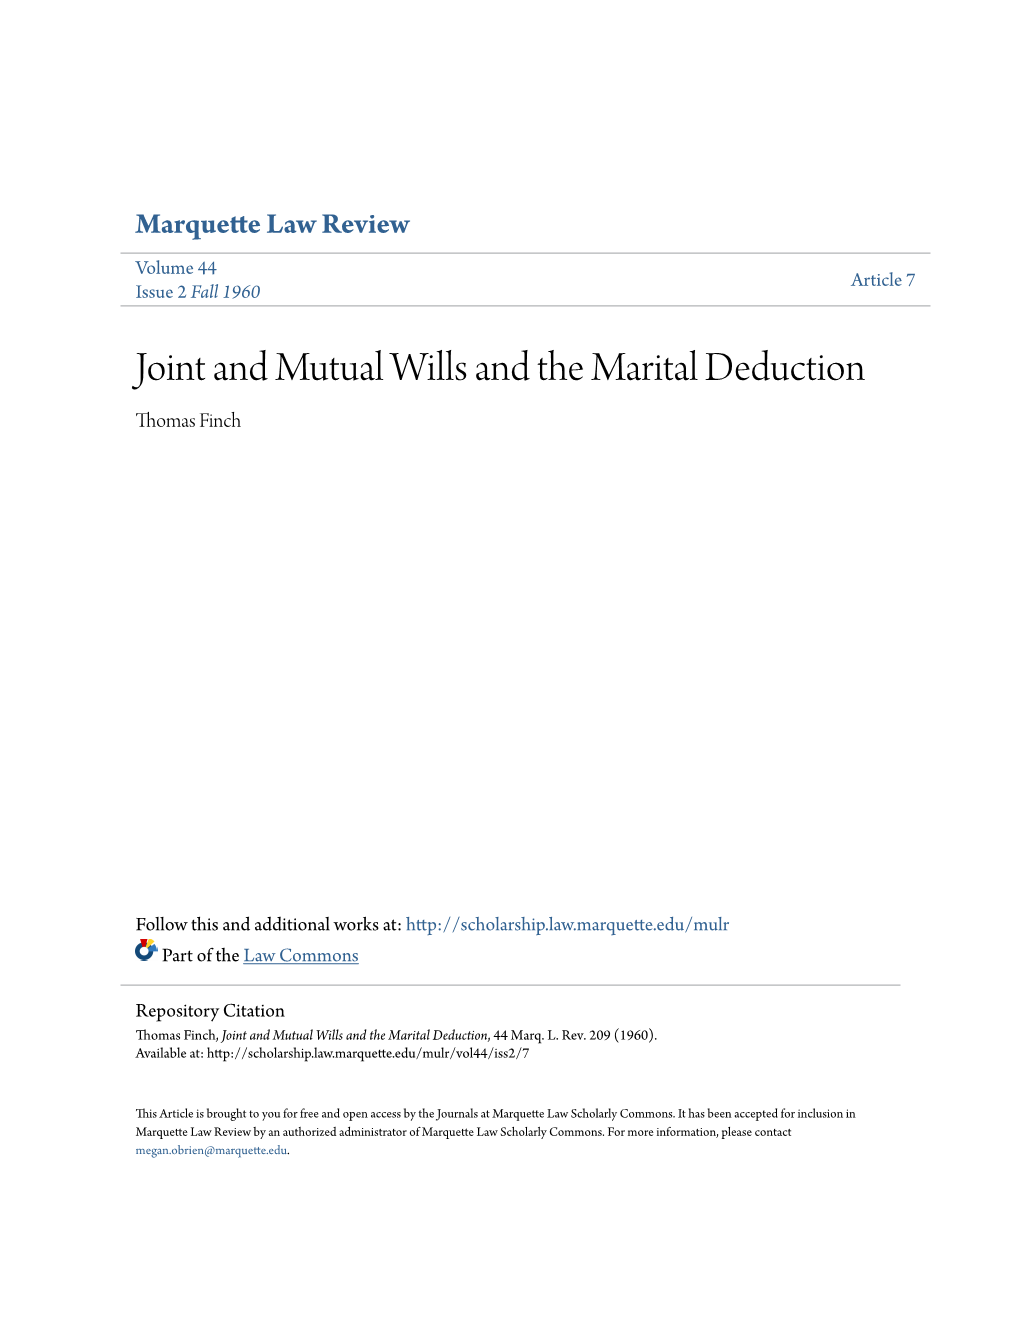 Joint and Mutual Wills and the Marital Deduction Thomas Finch